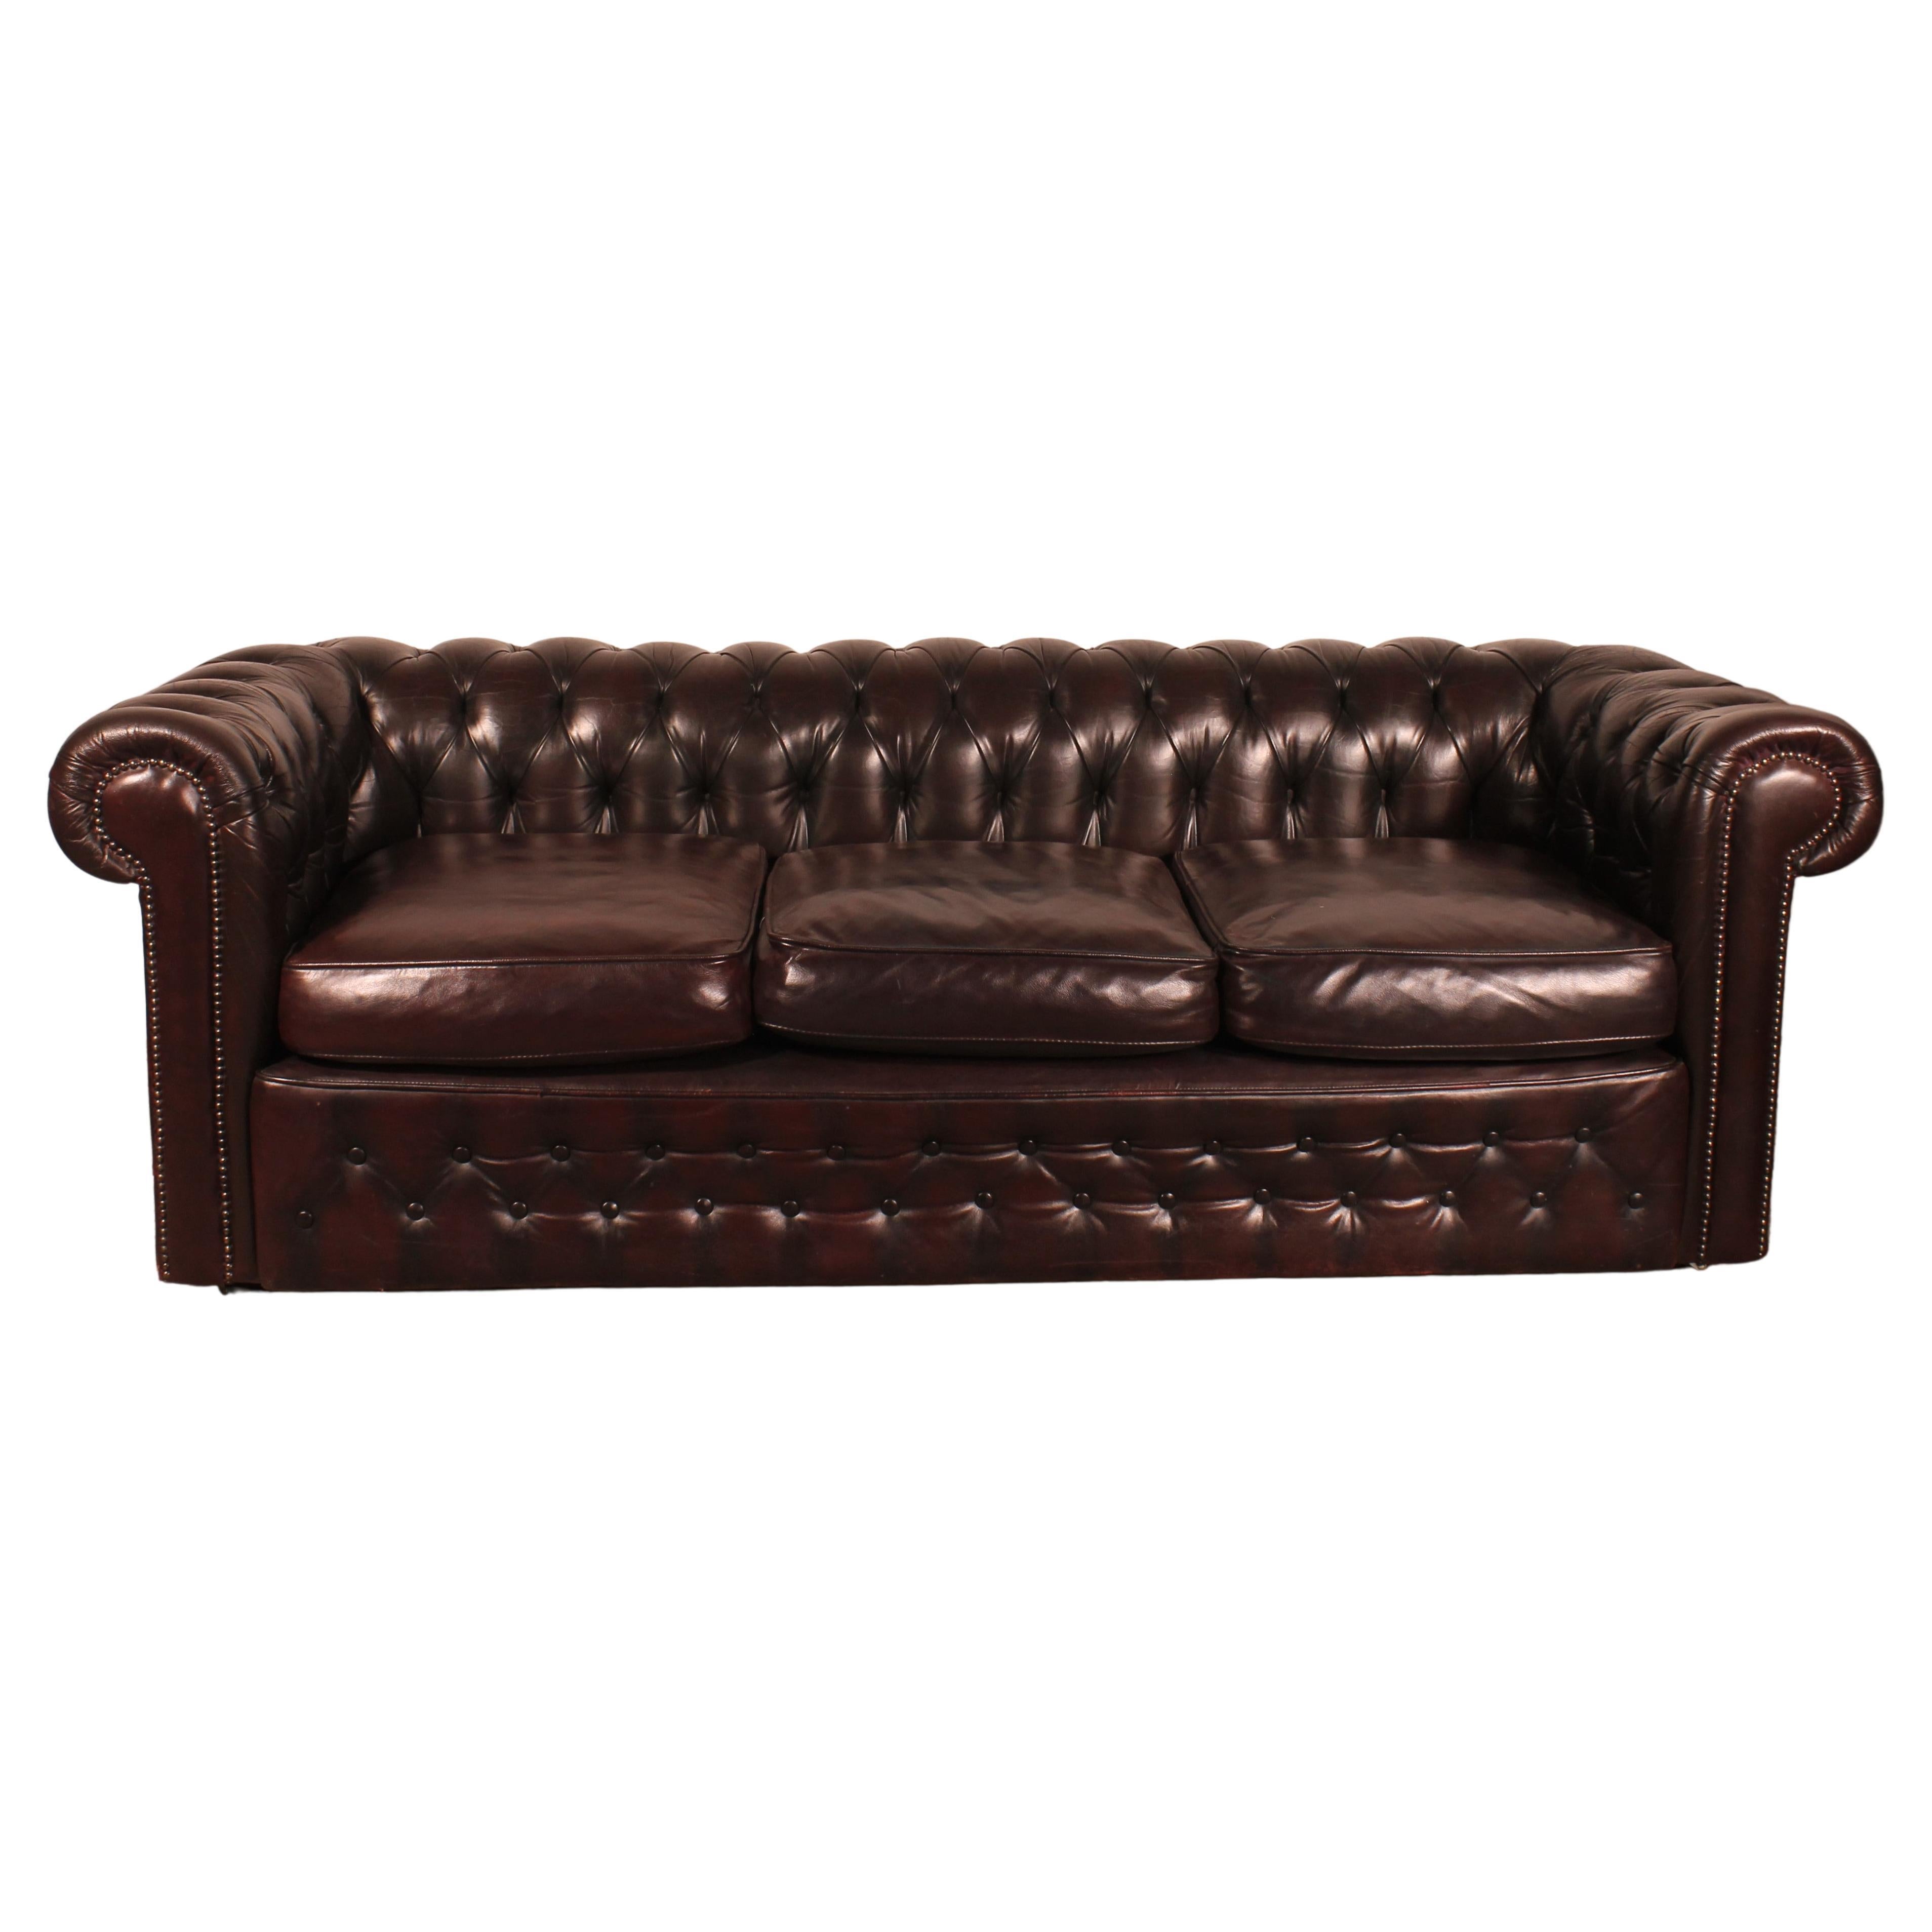 Three-seater Leather Chesterfield Sofa